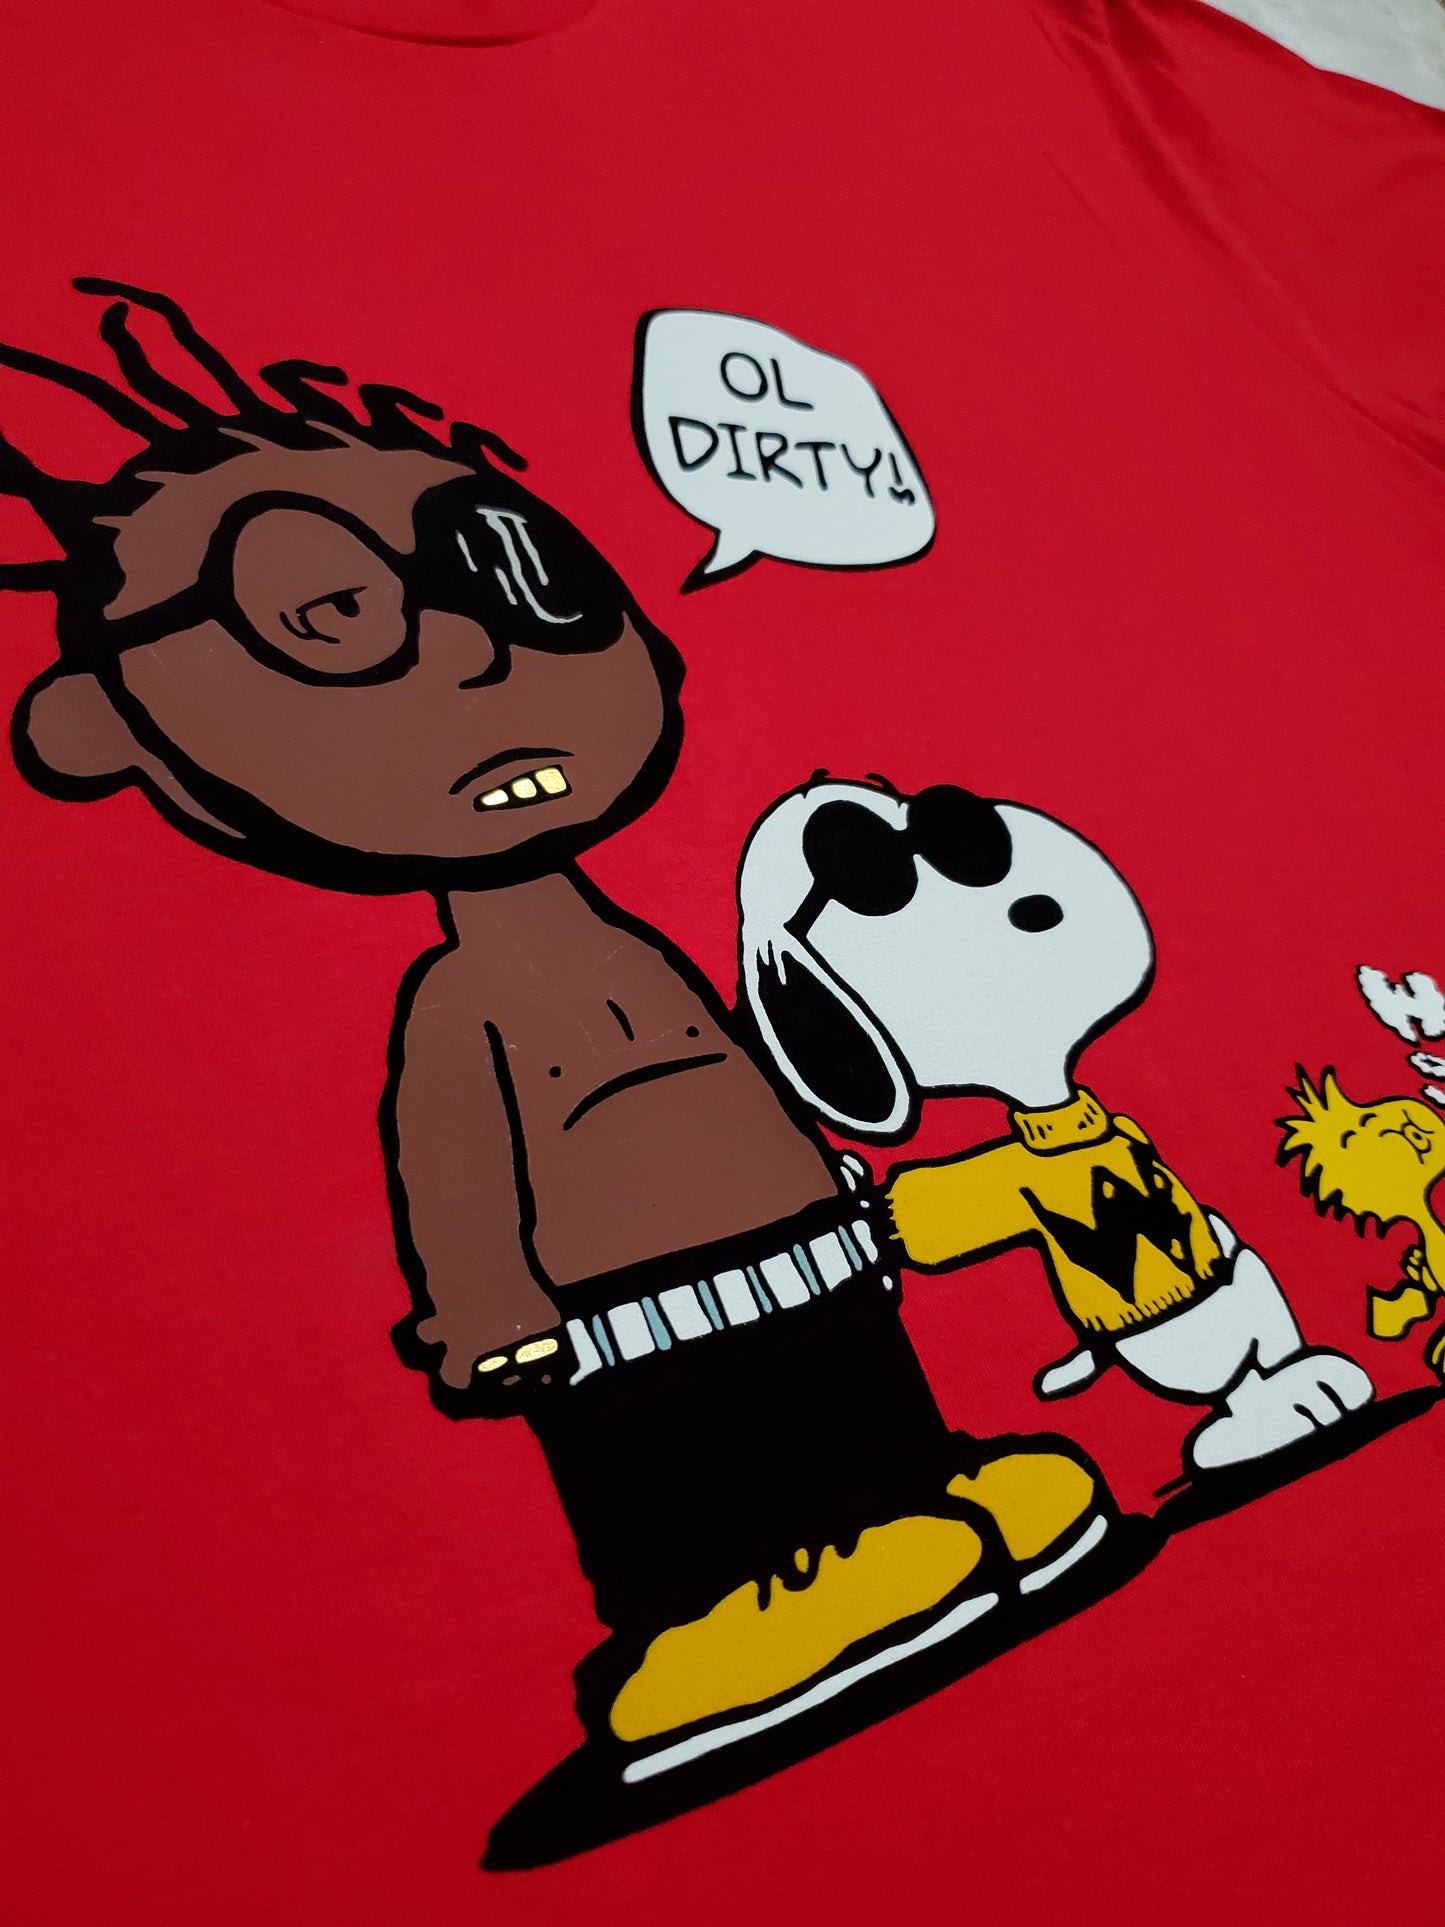 Ol' Dirty Peanuts T-Shirt - Centre Ave Clothing Co.